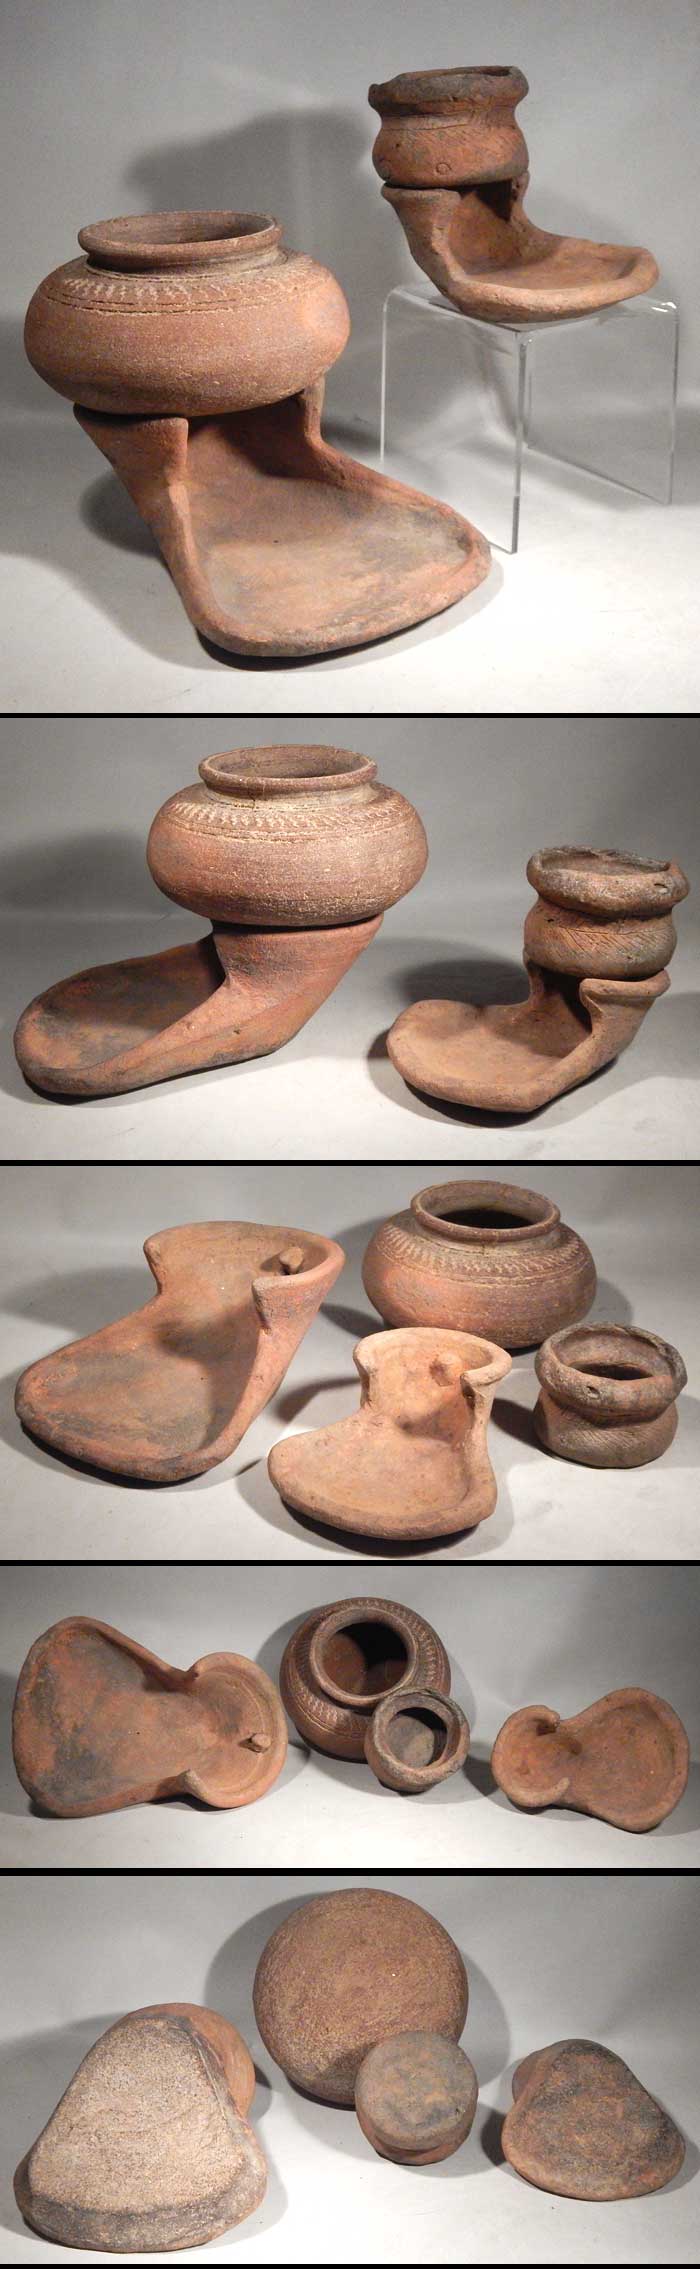 Chinese Neolithic Hemudu Terracotta Pottery Stove Cooking Vessel